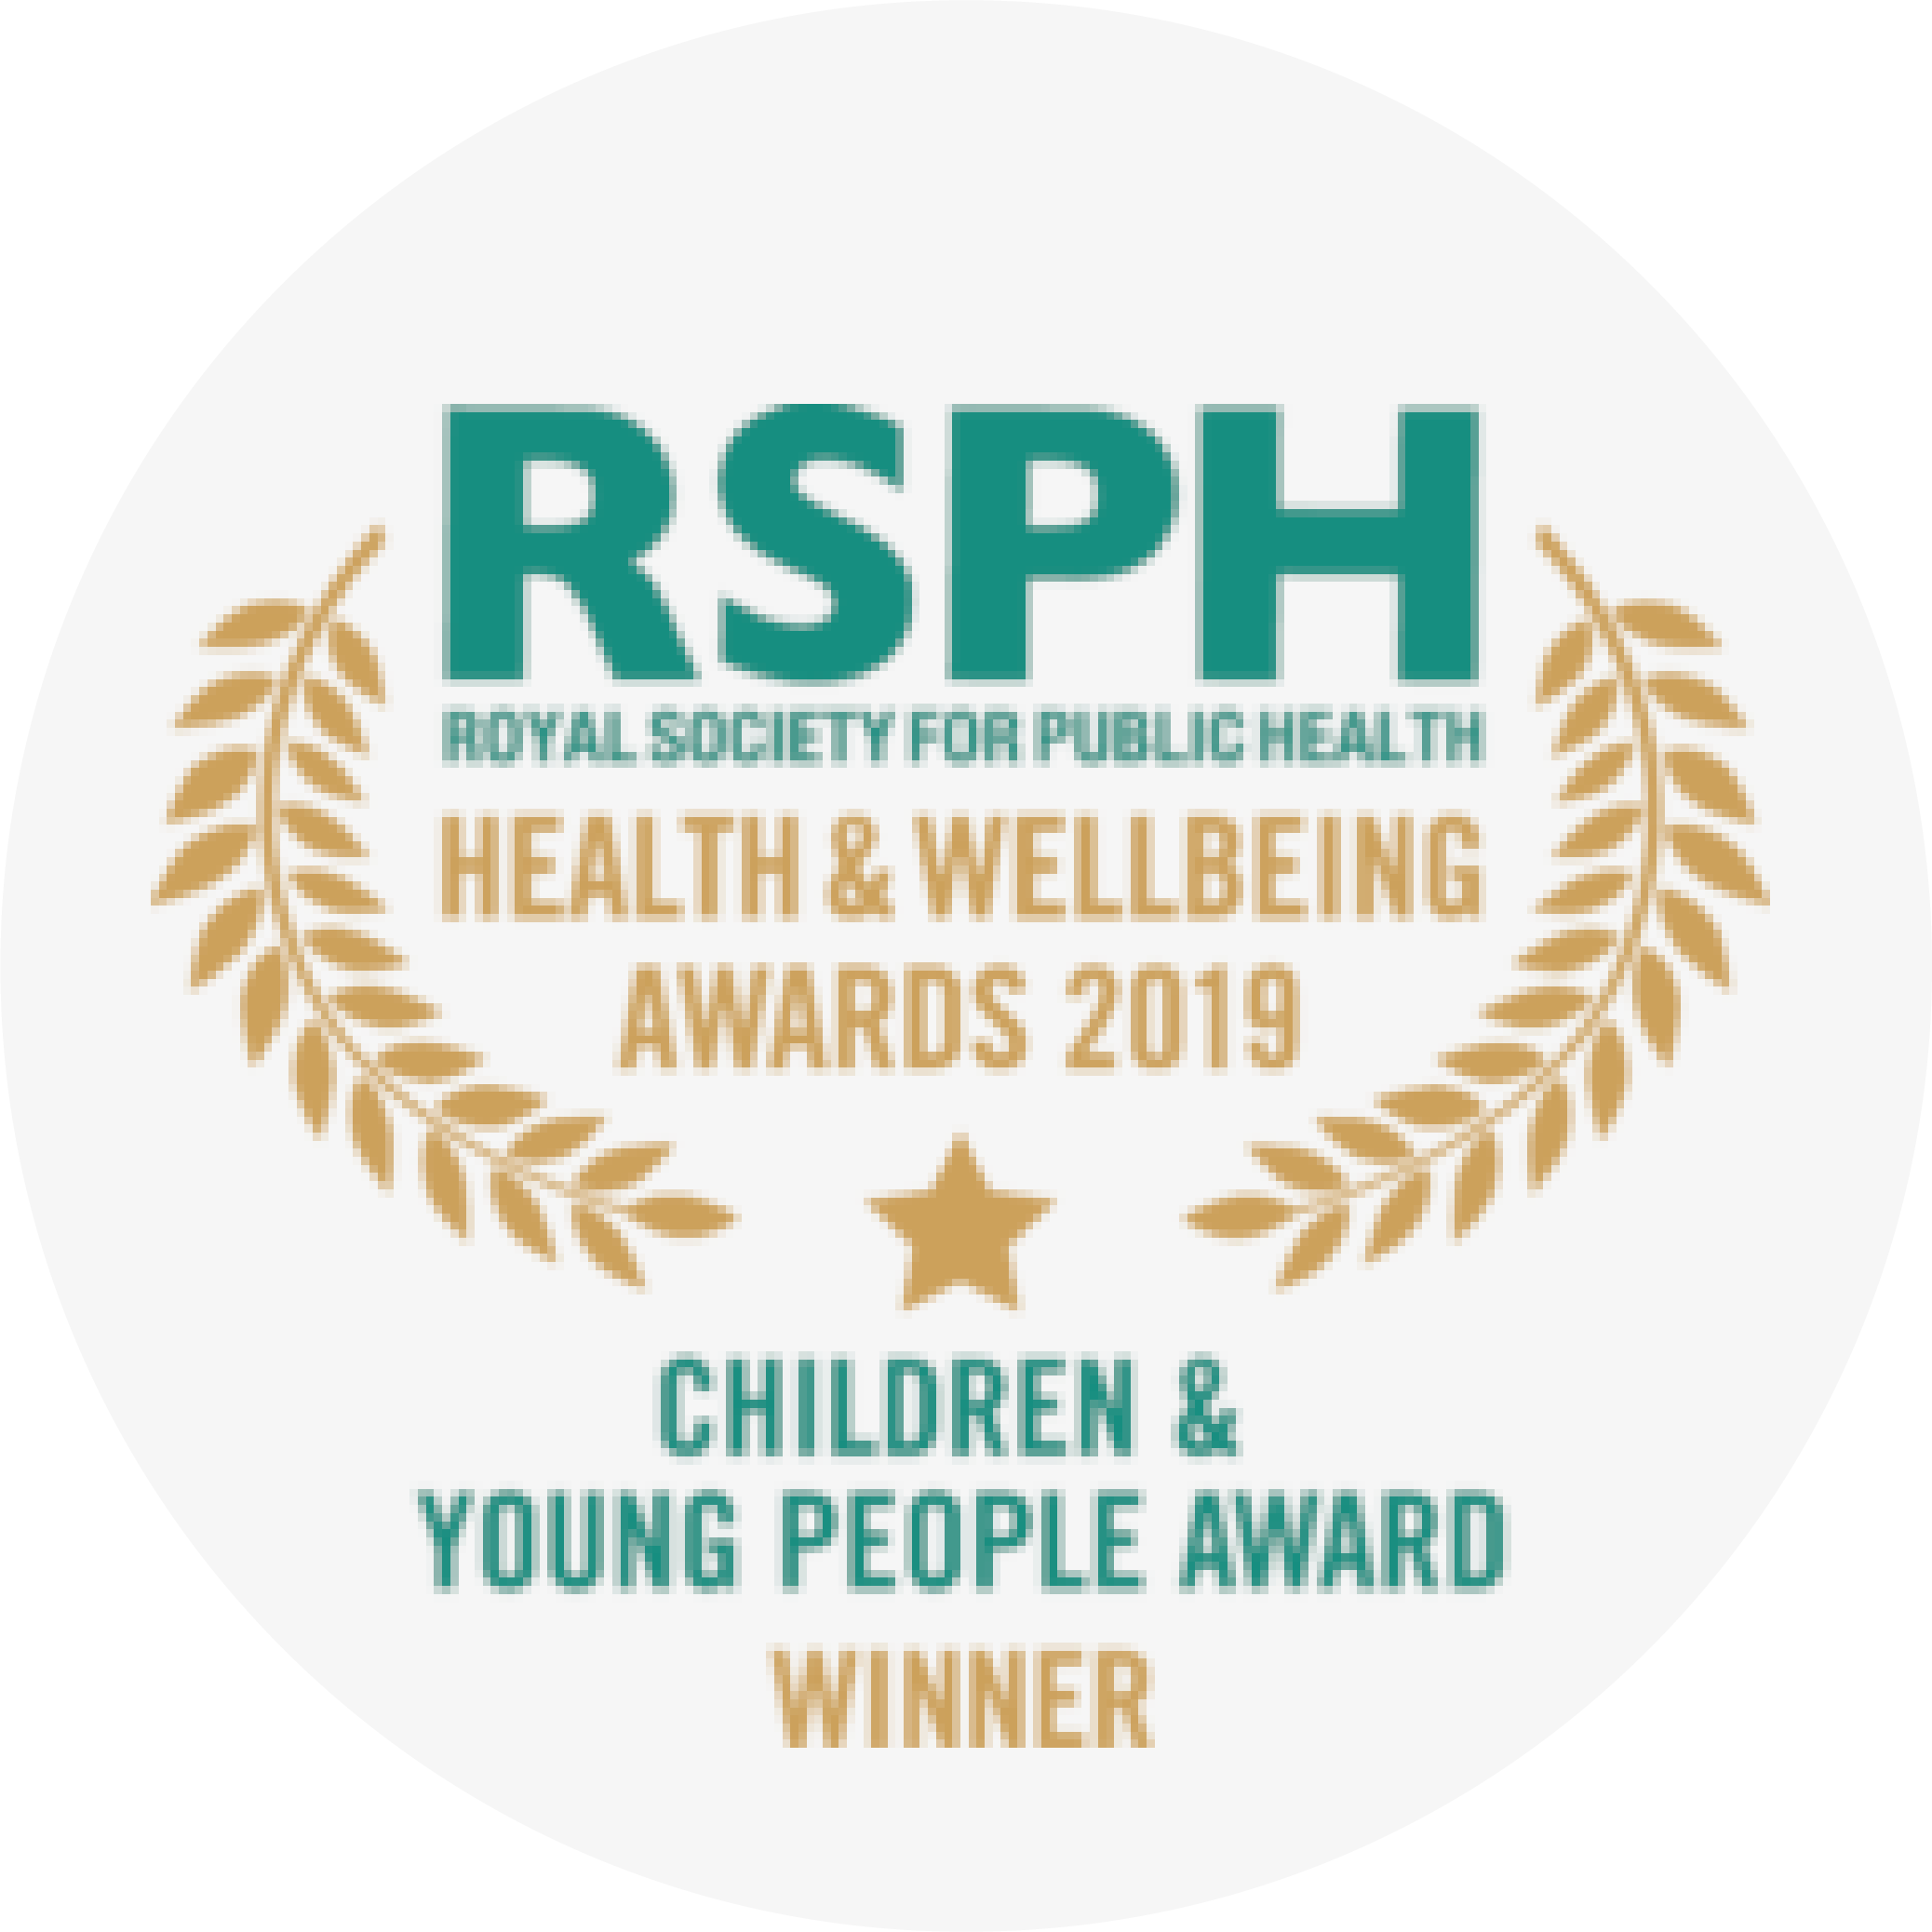 The Royal Society for Public Health Award for Children and Young People in 2019